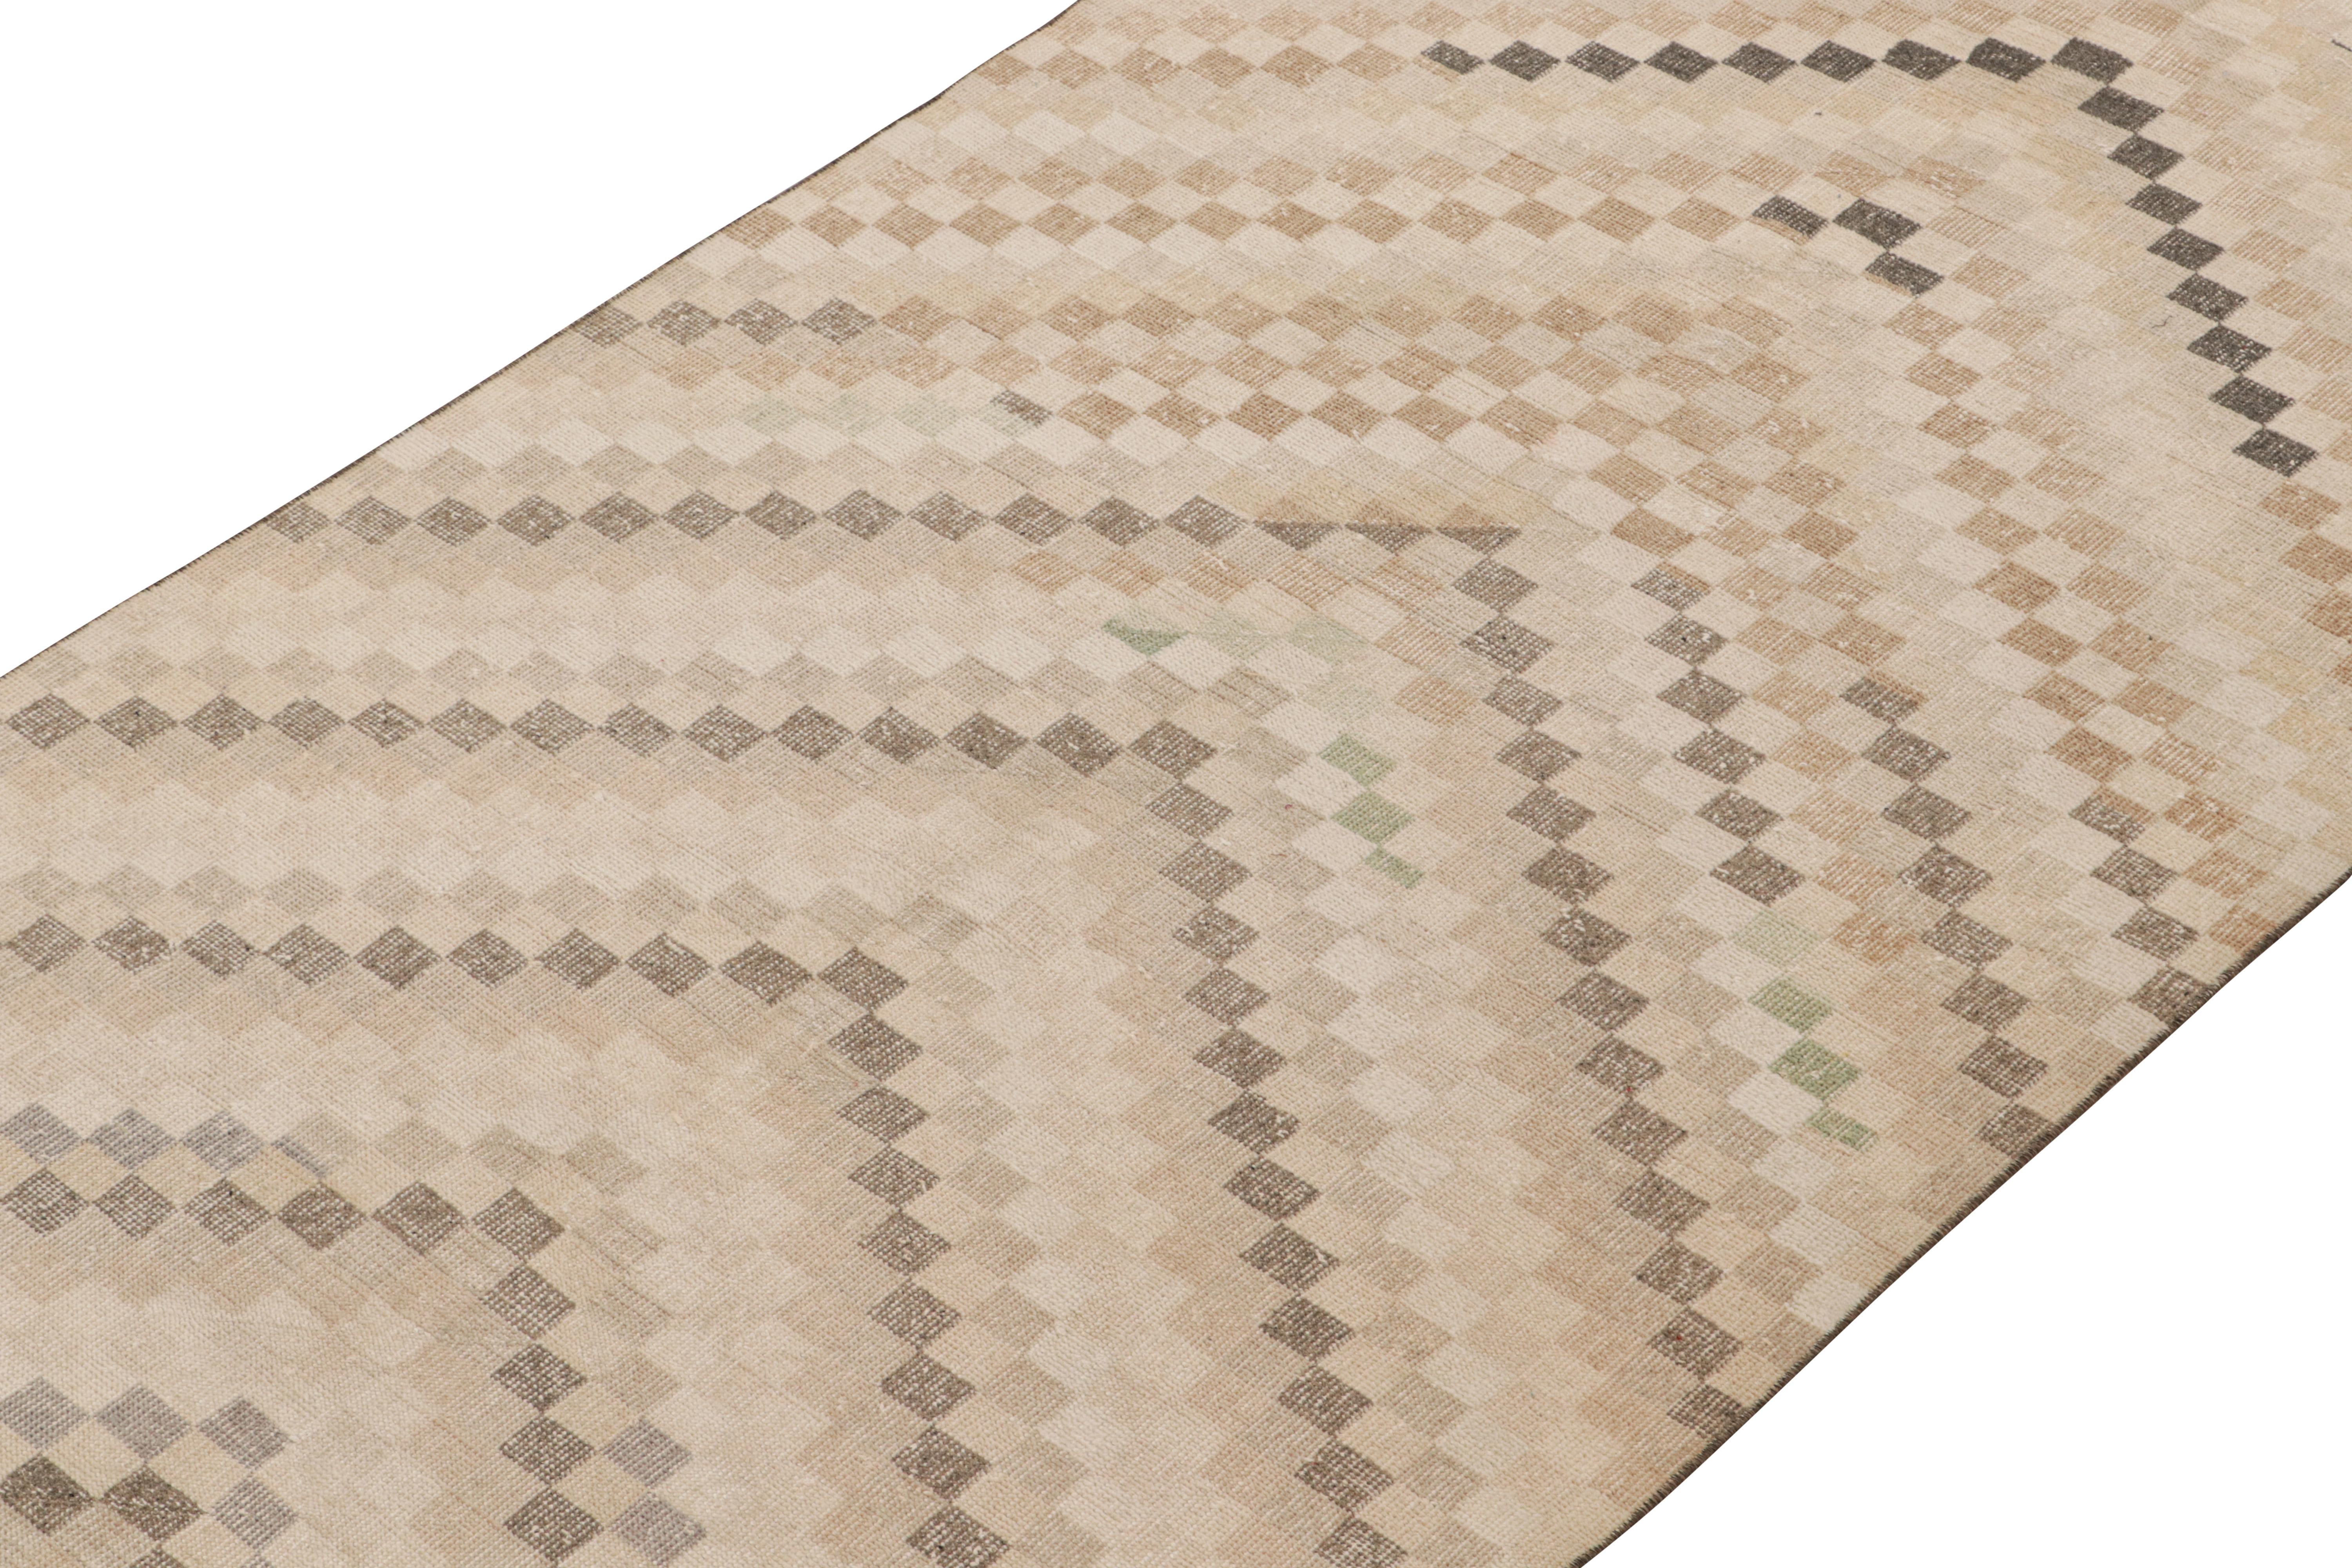 This vintage 5x10 rug is a new addition to Rug & Kilim’s Mid-Century Pasha Collection. This line is a commemoration, with rare curations we believe to hail from multidisciplinary Turkish designer Zeki Müren. 

Further on the Design:

Hand-knotted in